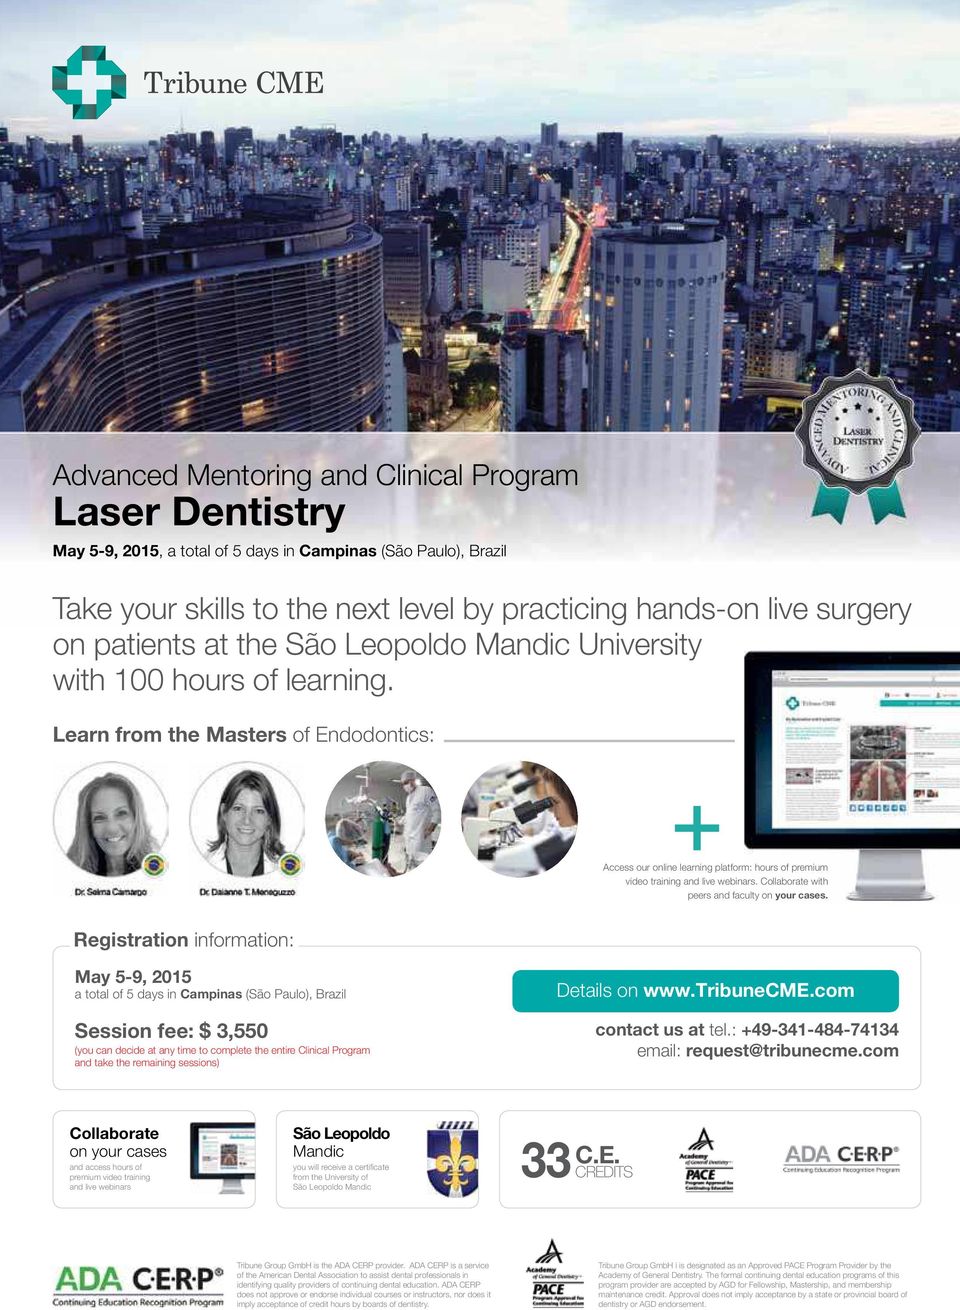 Learn from the Masters of Endodontics: Access our online learning platform: hours of premium video training and live webinars. Collaborate with peers and faculty on your cases.